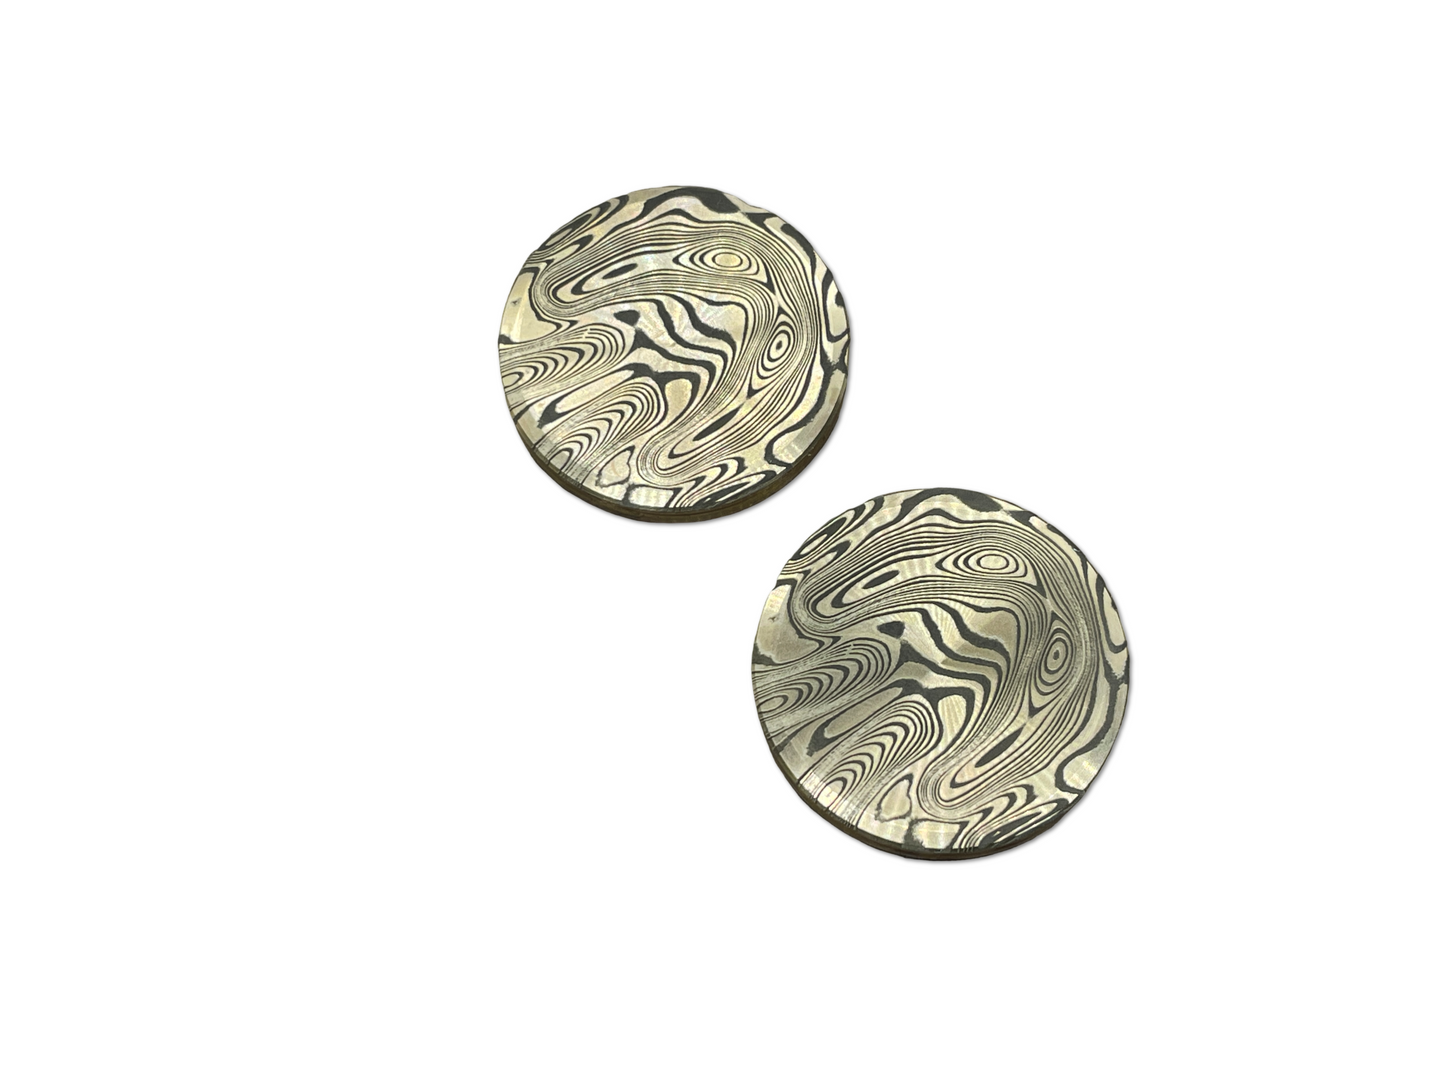 Dama FISH pattern engraved HAPTIC Coins CLICKY Brass fidget